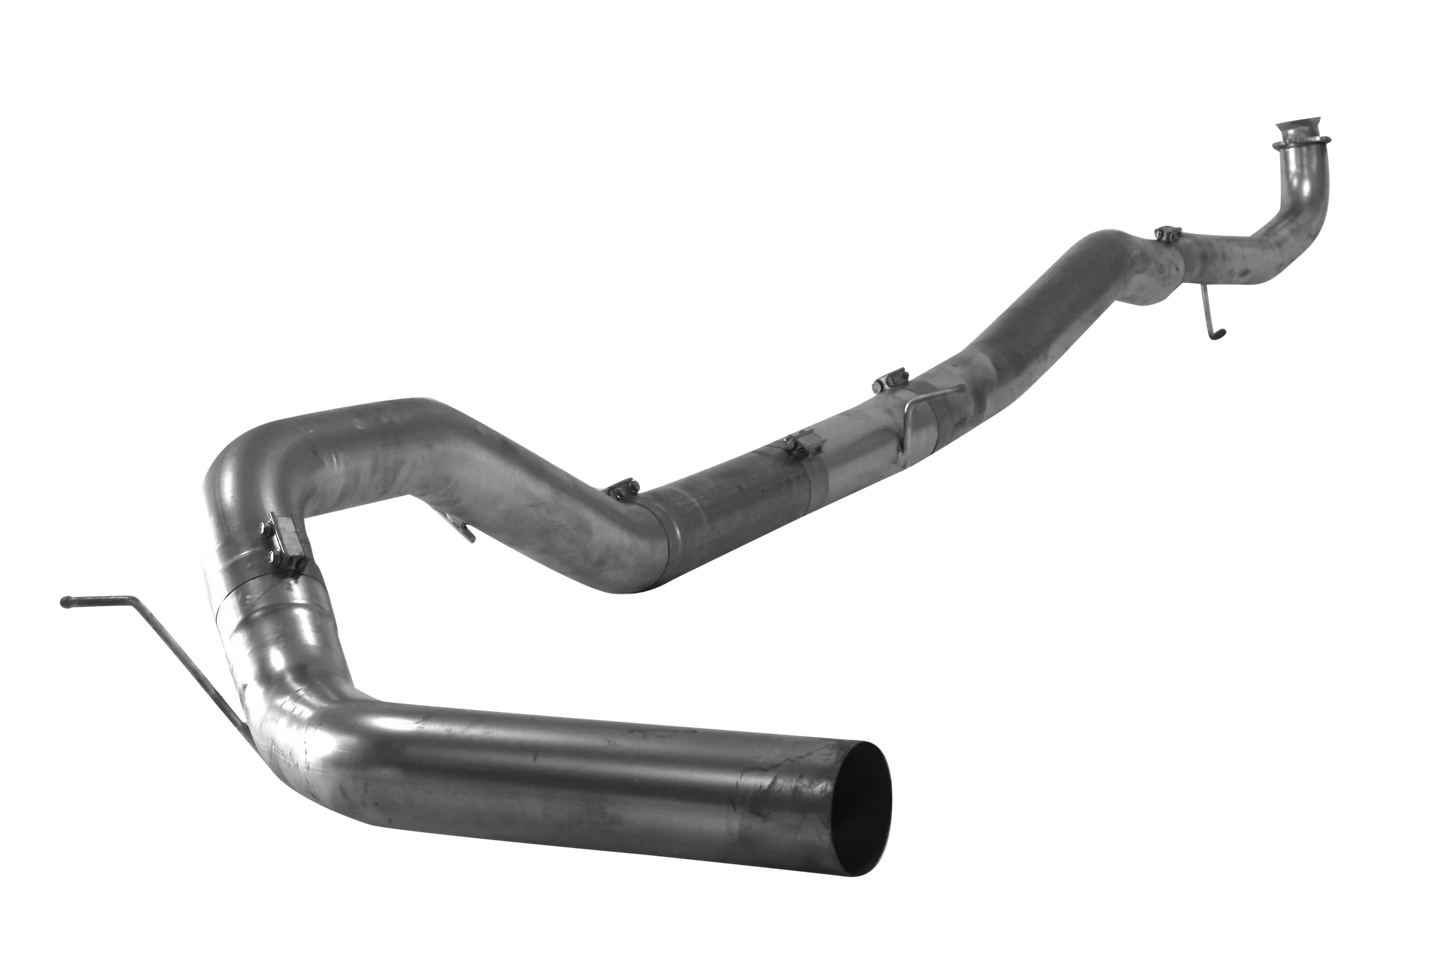 431024 431025 Mel's Manufacturing 4" Downpipe Back Single | Cab & Chassis-2017-2019 GM 2500/3500 6.6L DURAMAX L5P Mels Mfg FloPro Flo-Pro Flo Pro Hell On Wheels Performance Ltd Limited Canadian Owned and Operated Online Diesel Parts Distribution & Wholesale Supply Center in Alberta Canada Shipping Supplying to Alberta British Columbia Sask Saskatchewan Manitoba Ontario Quebec Newfoundland Labrador New Brunswick Nova Scotia Prince Edward Island AB BC SK MB ON QC PQ NS NB NFLD N.L. PEI